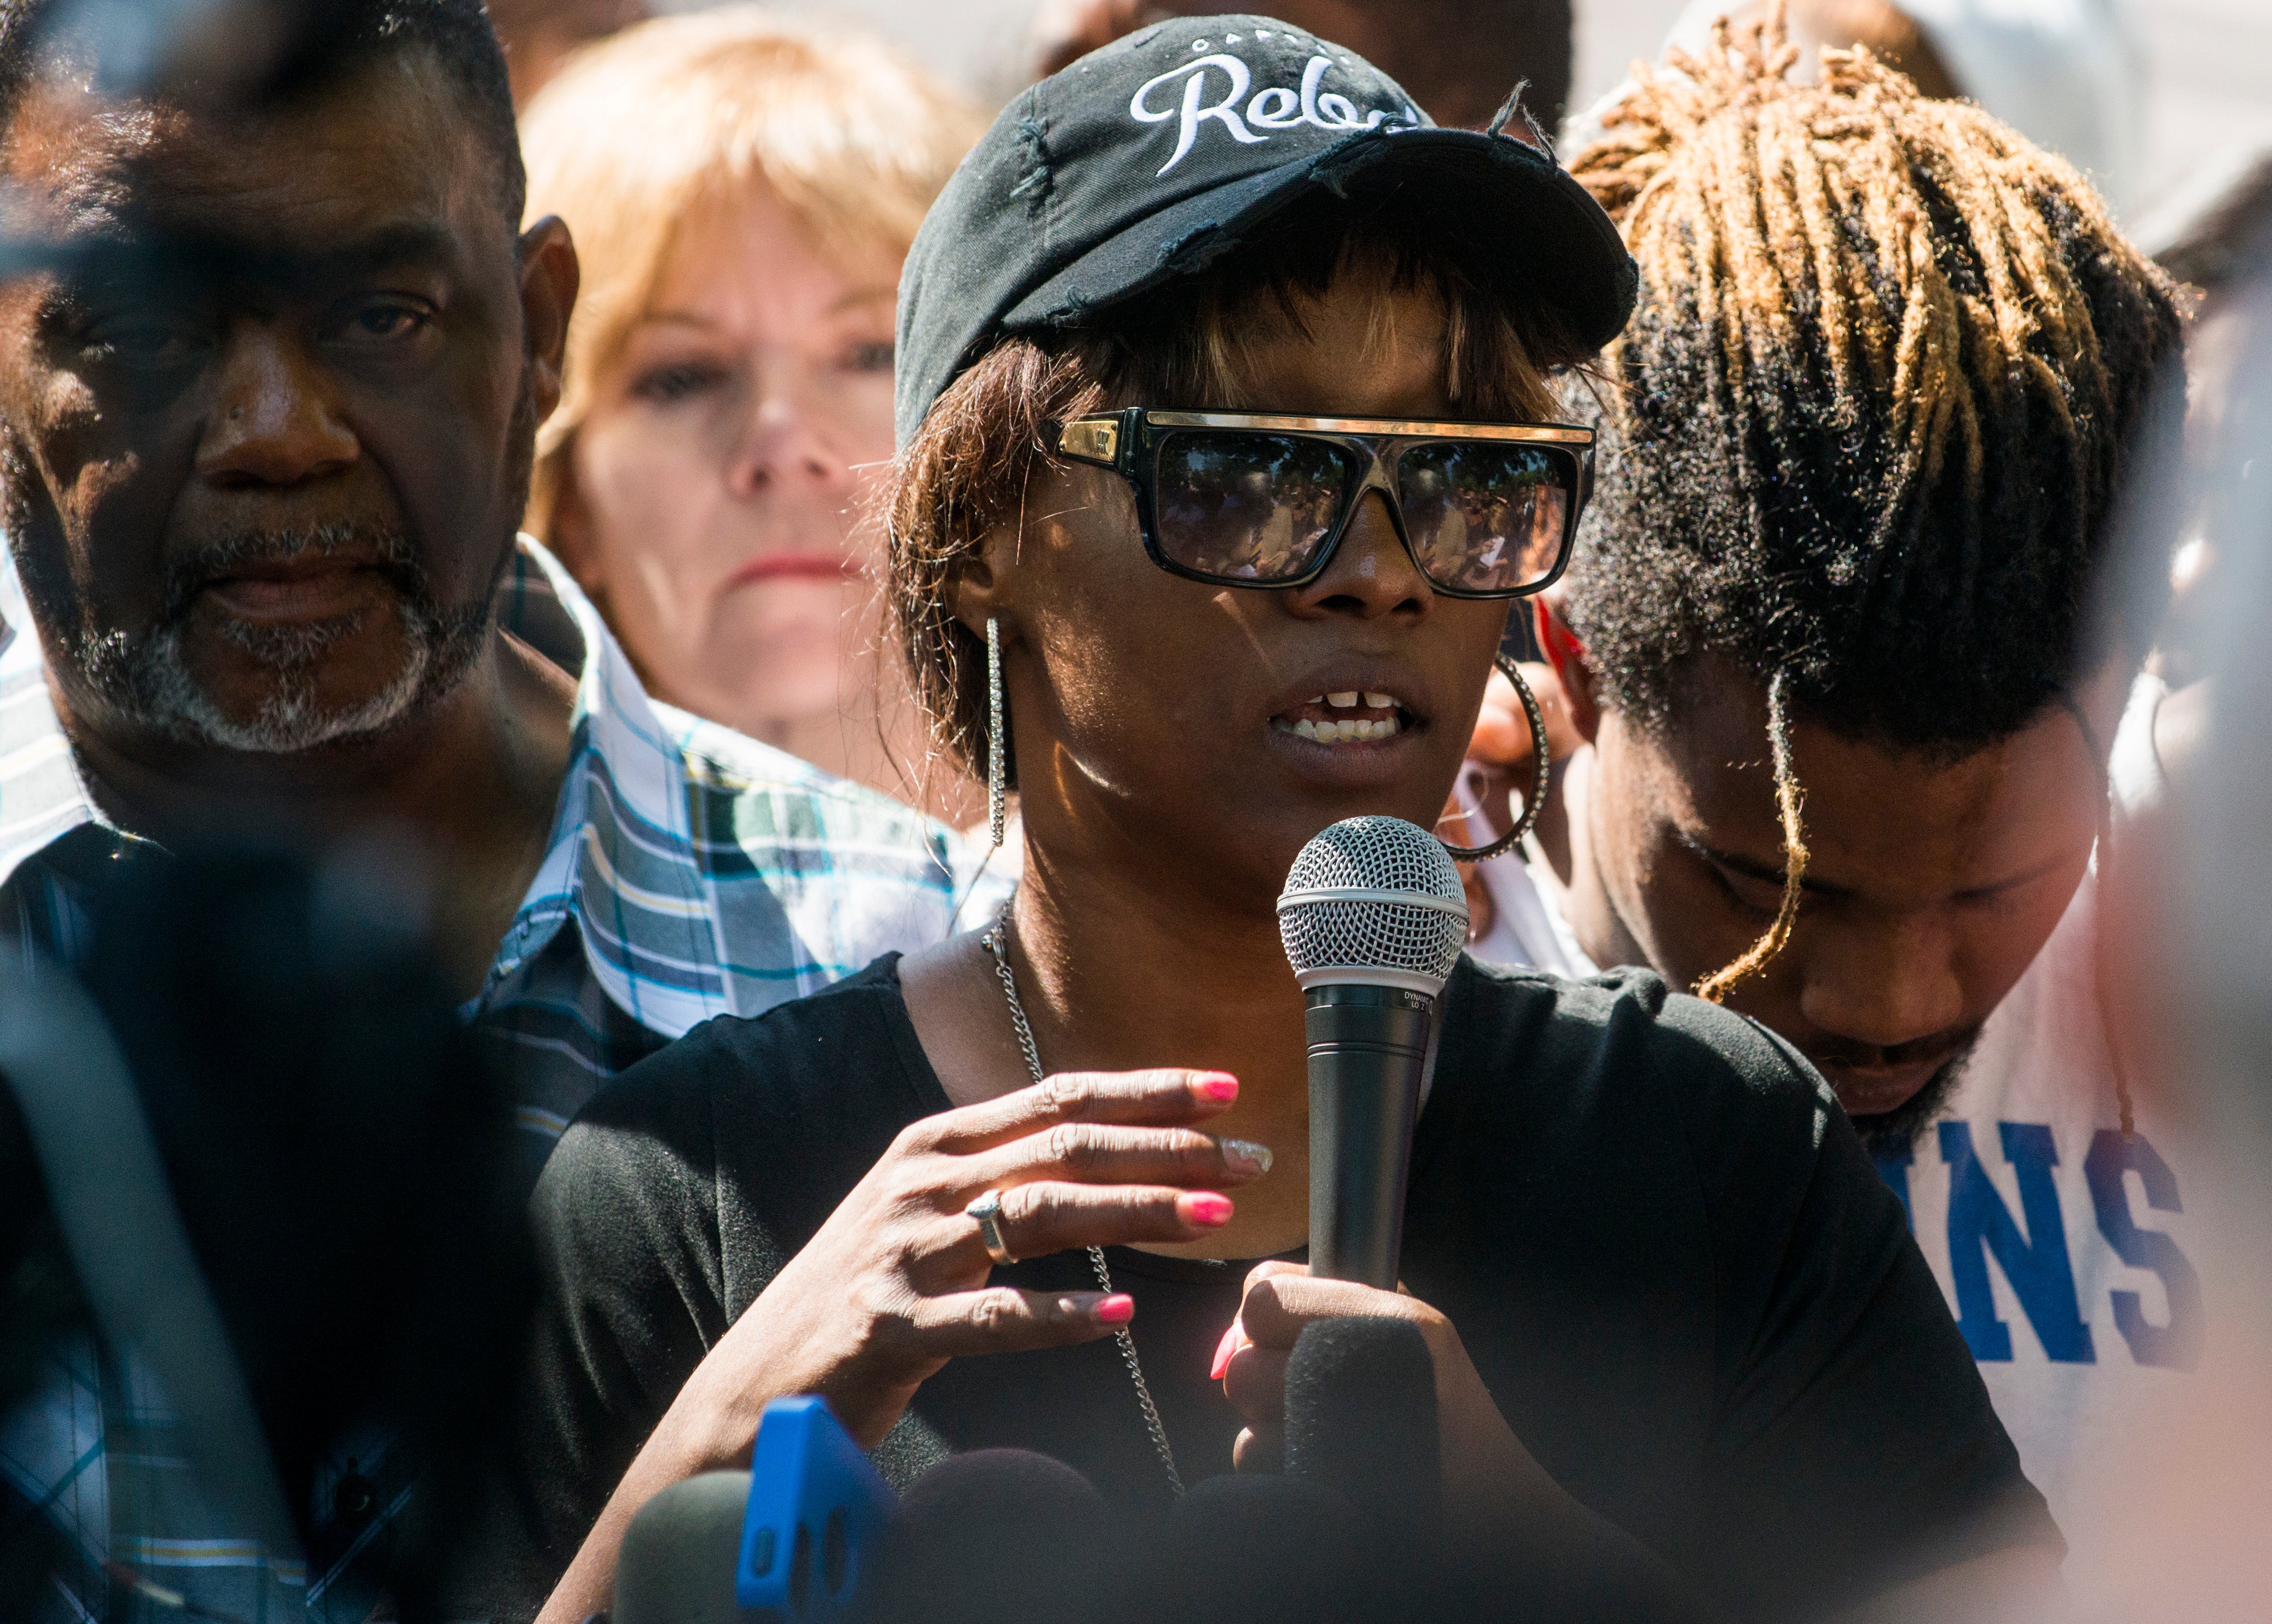 Fearing For Her Life, Philando Castile's Girlfriend Livestreamed Fatal Police Shooting
